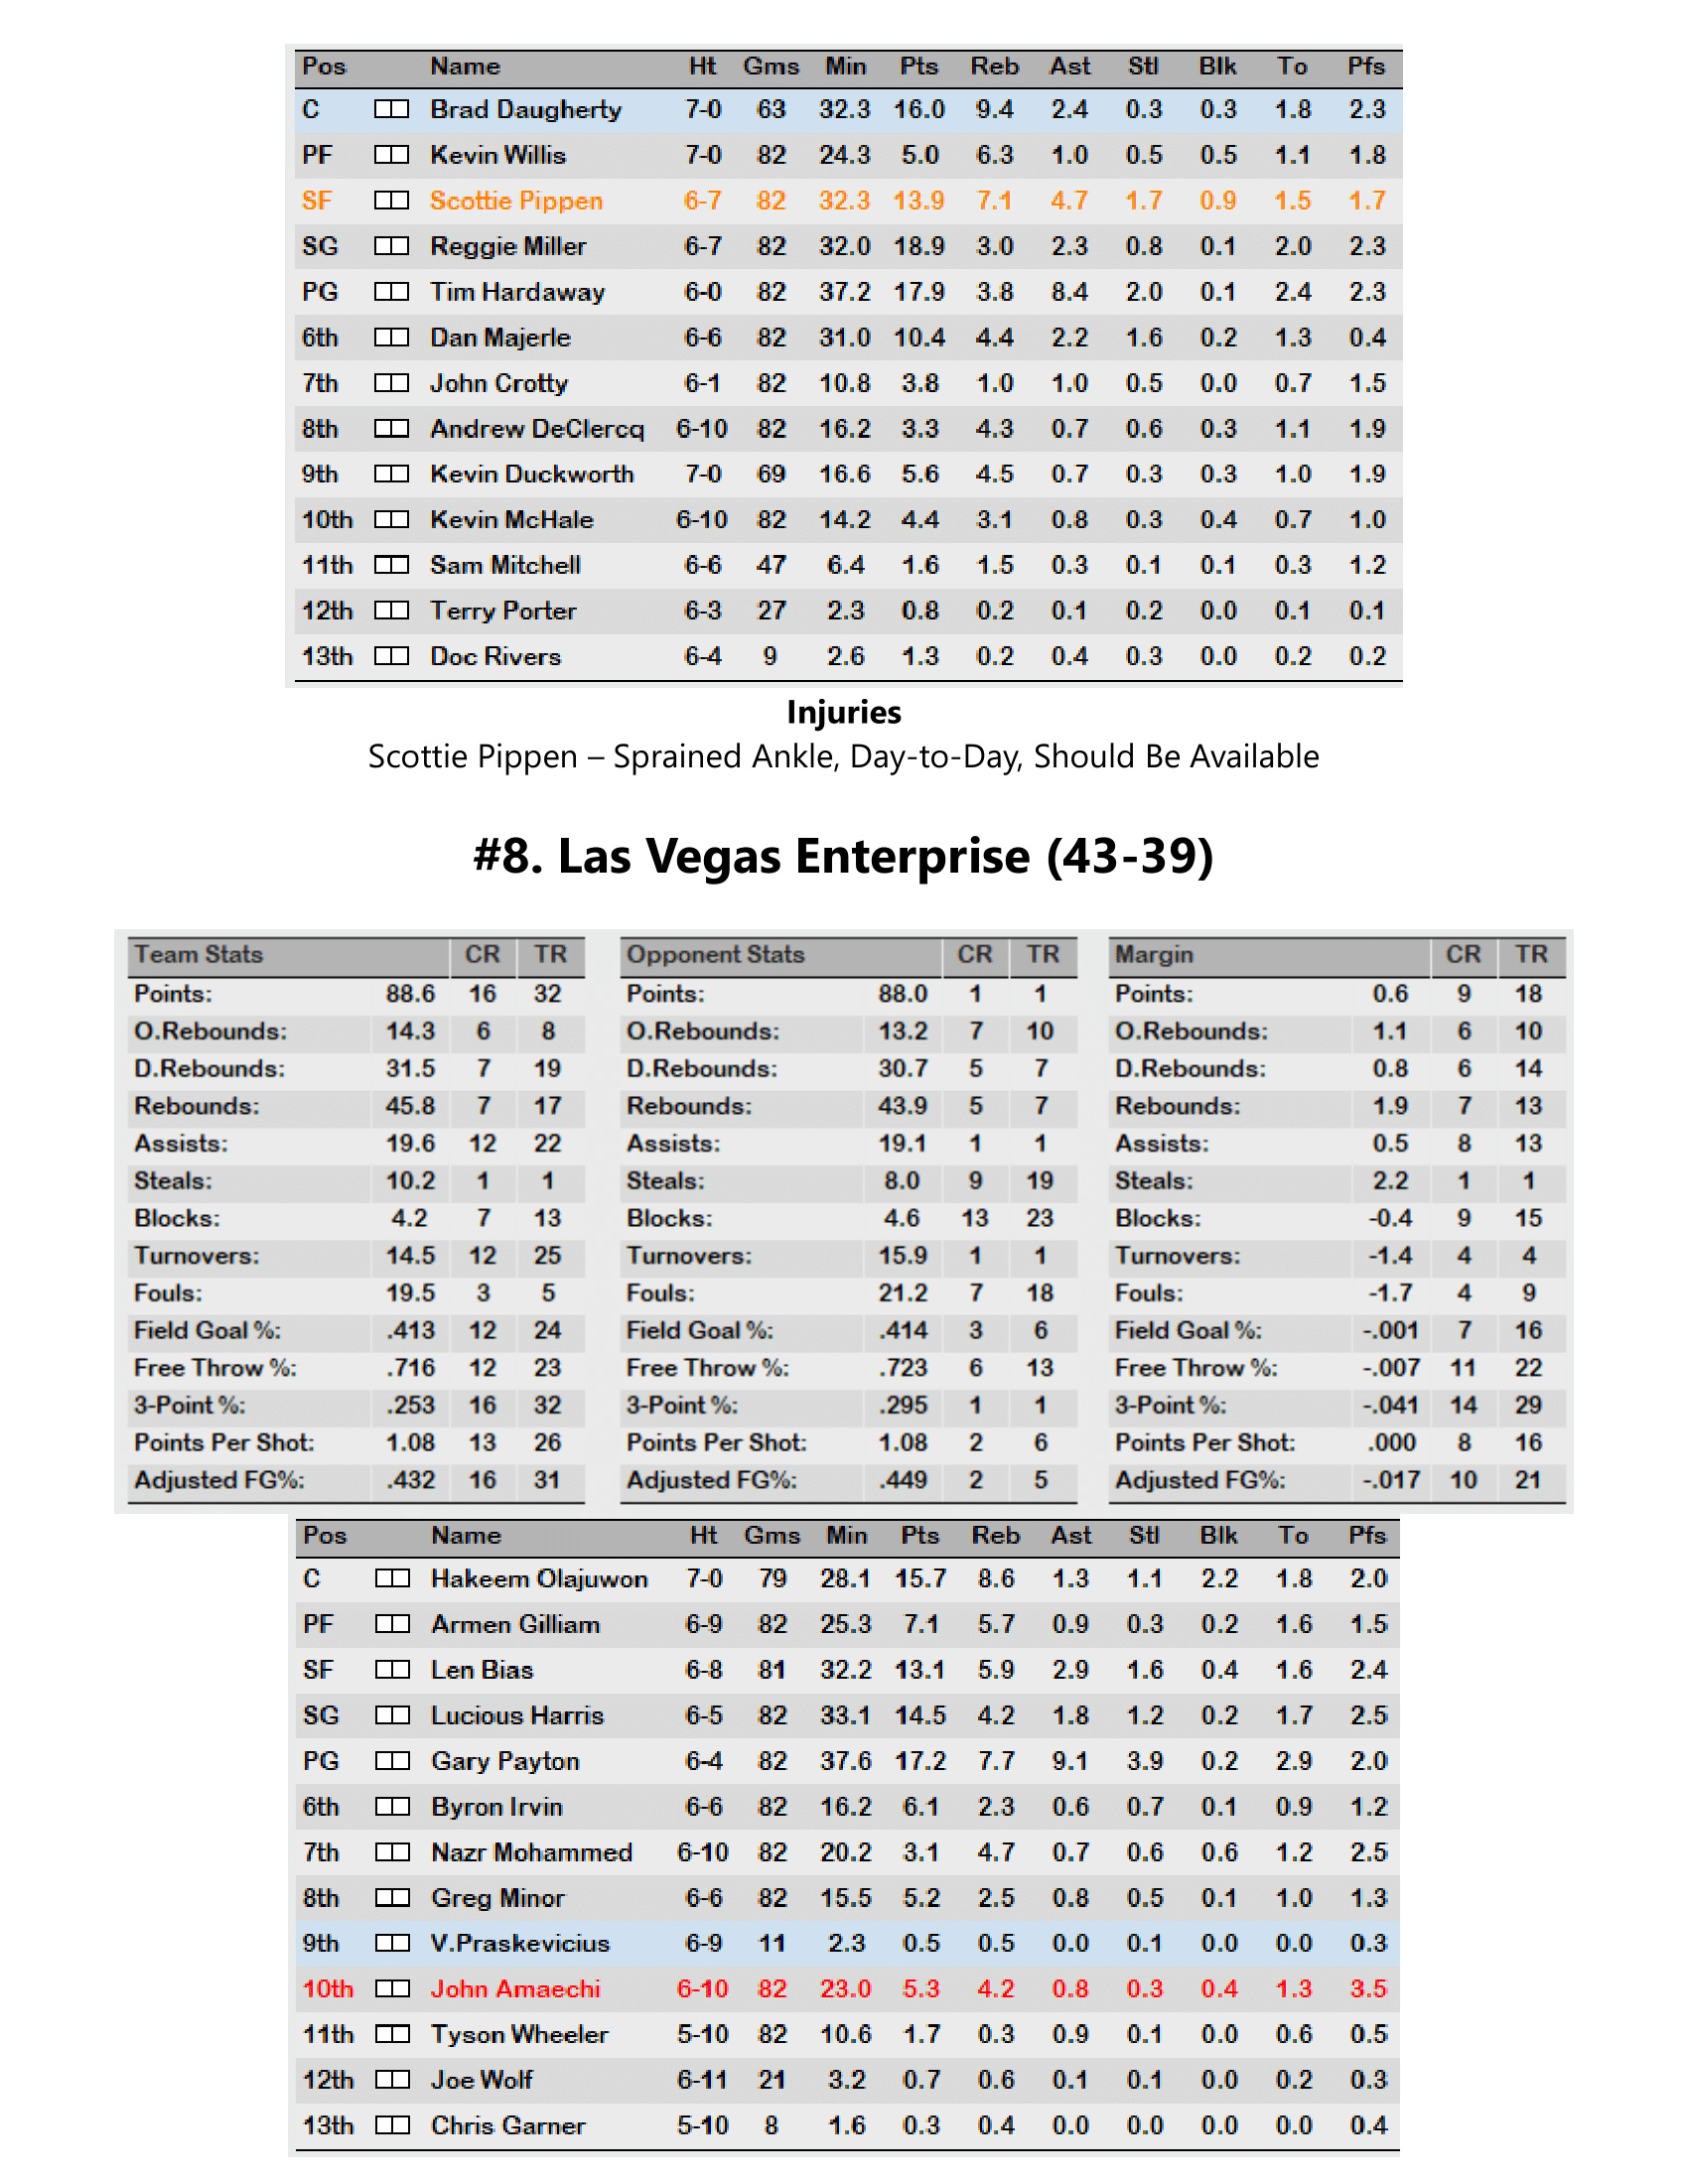 98-99-Part-3-Playoff-Preview-07.png